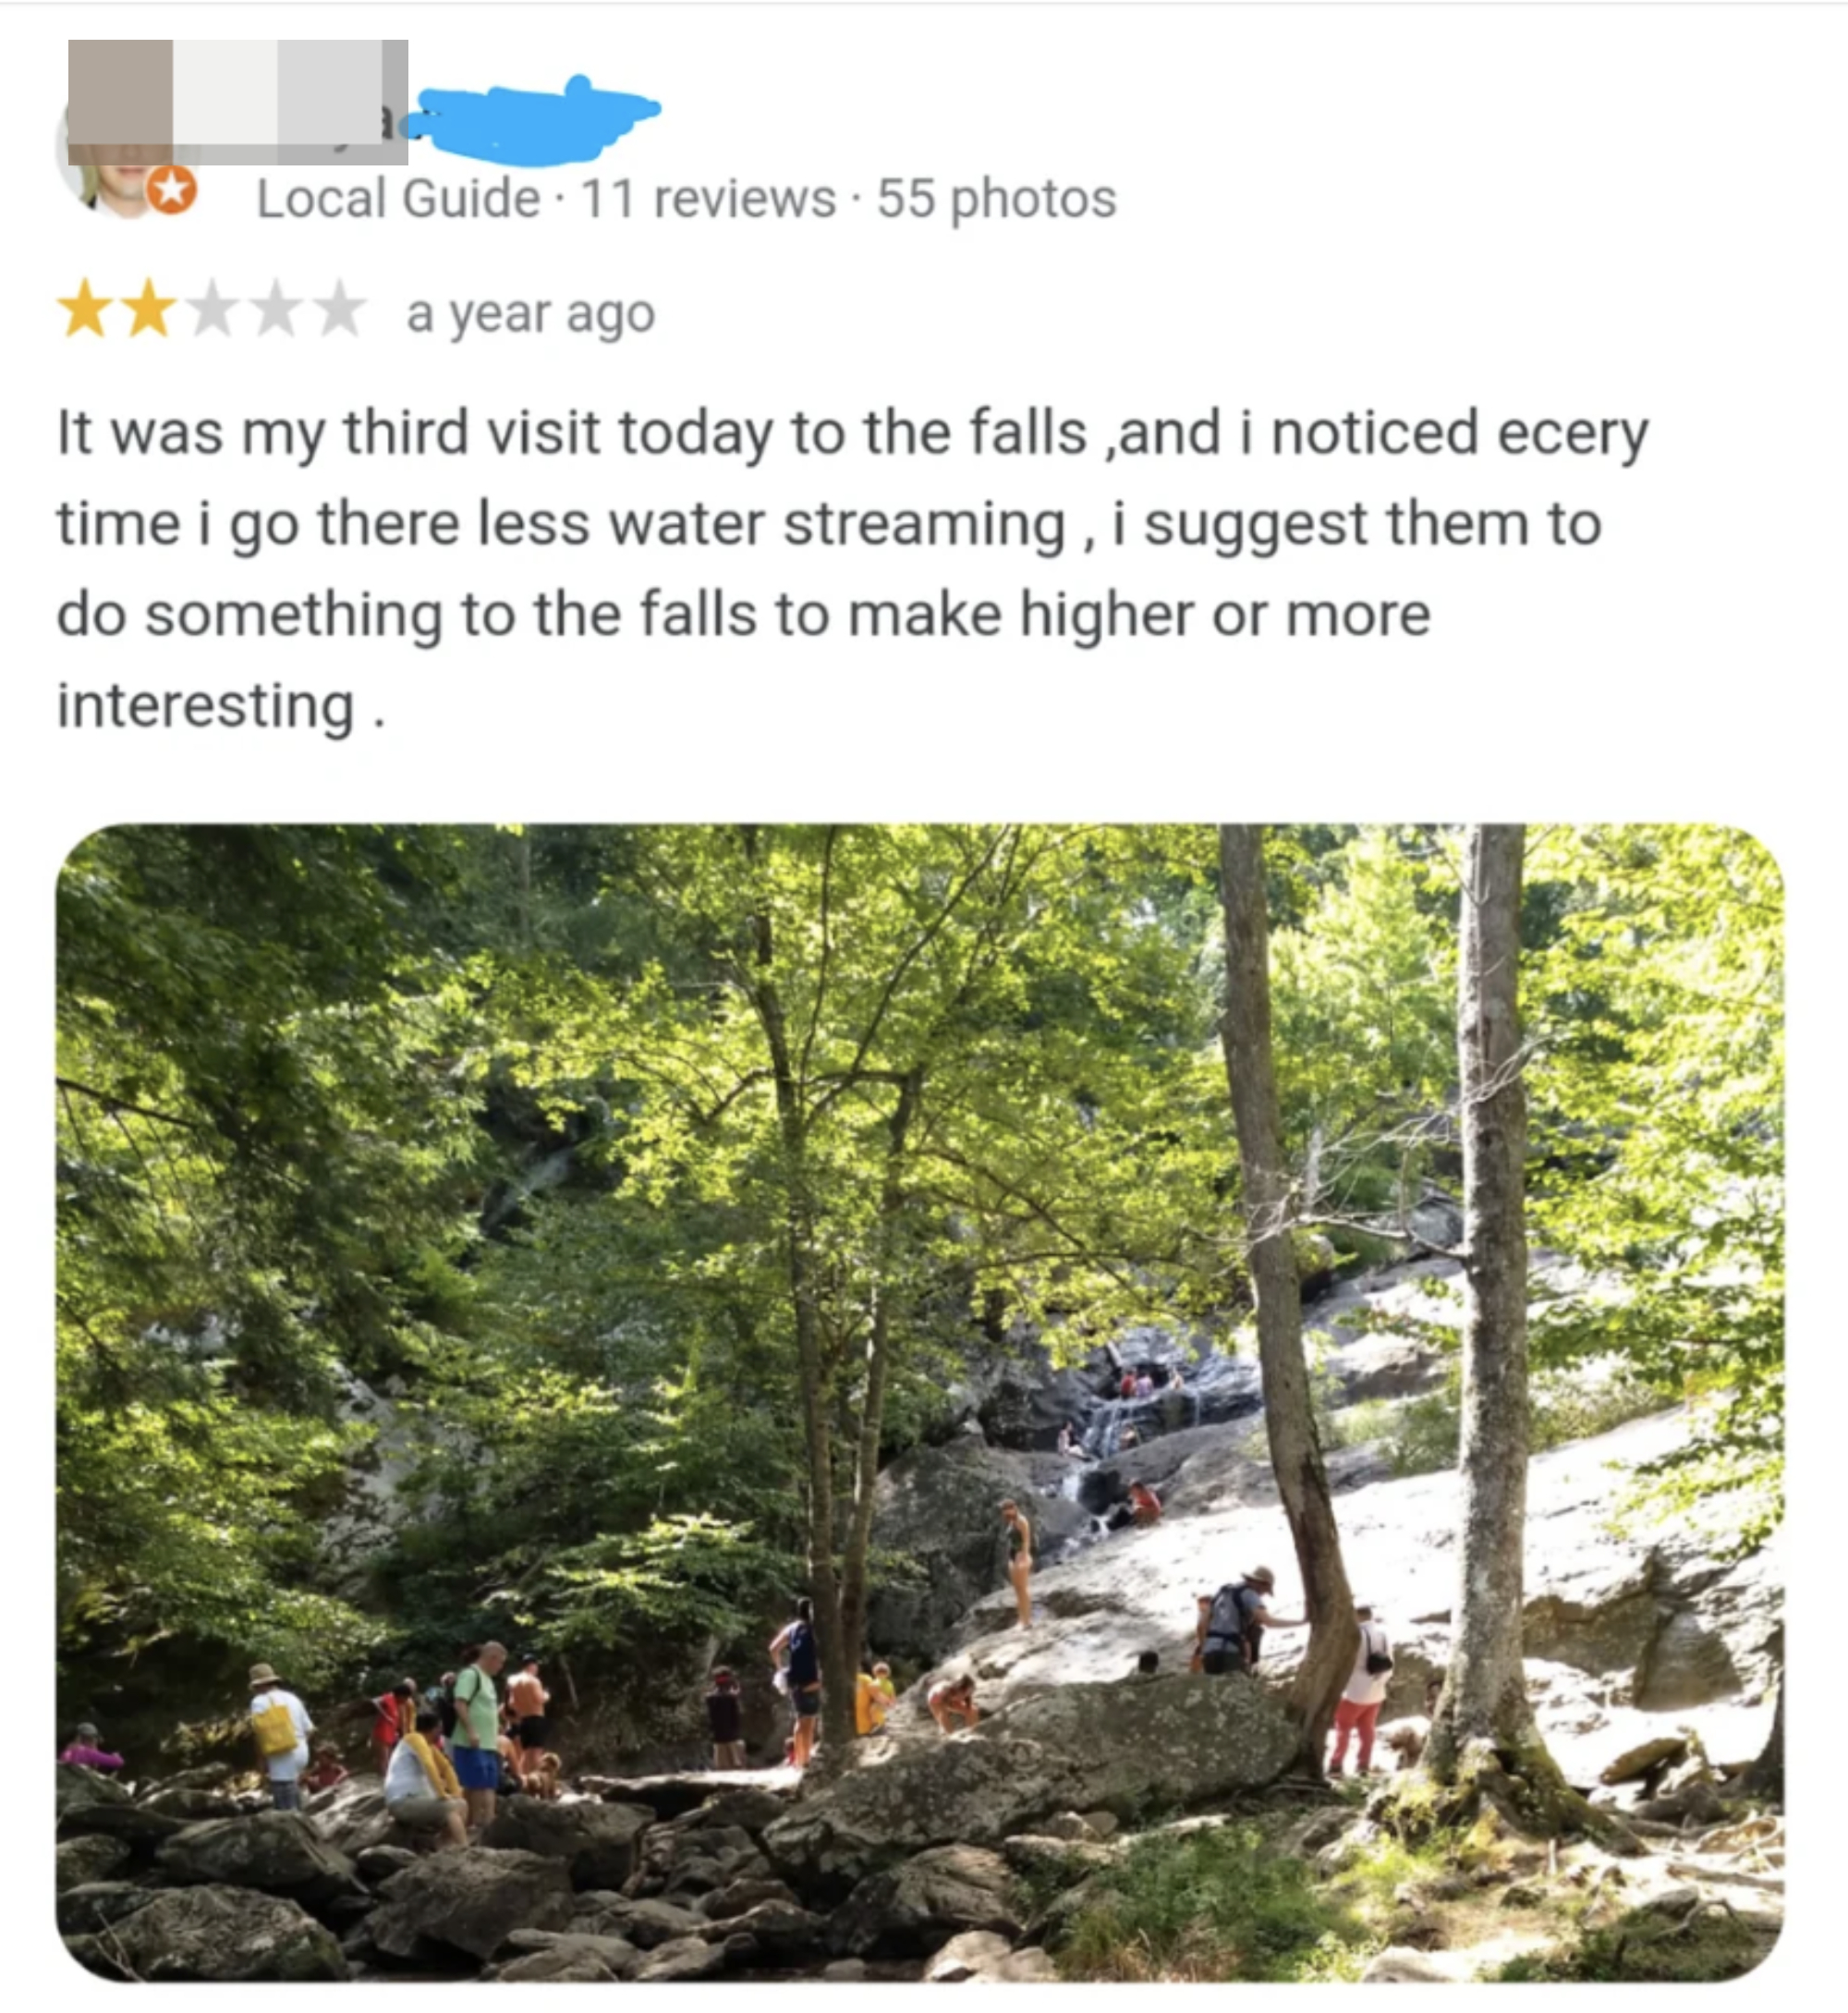 &quot;i suggest them to do something to the falls to make higher or more interesting .&quot;